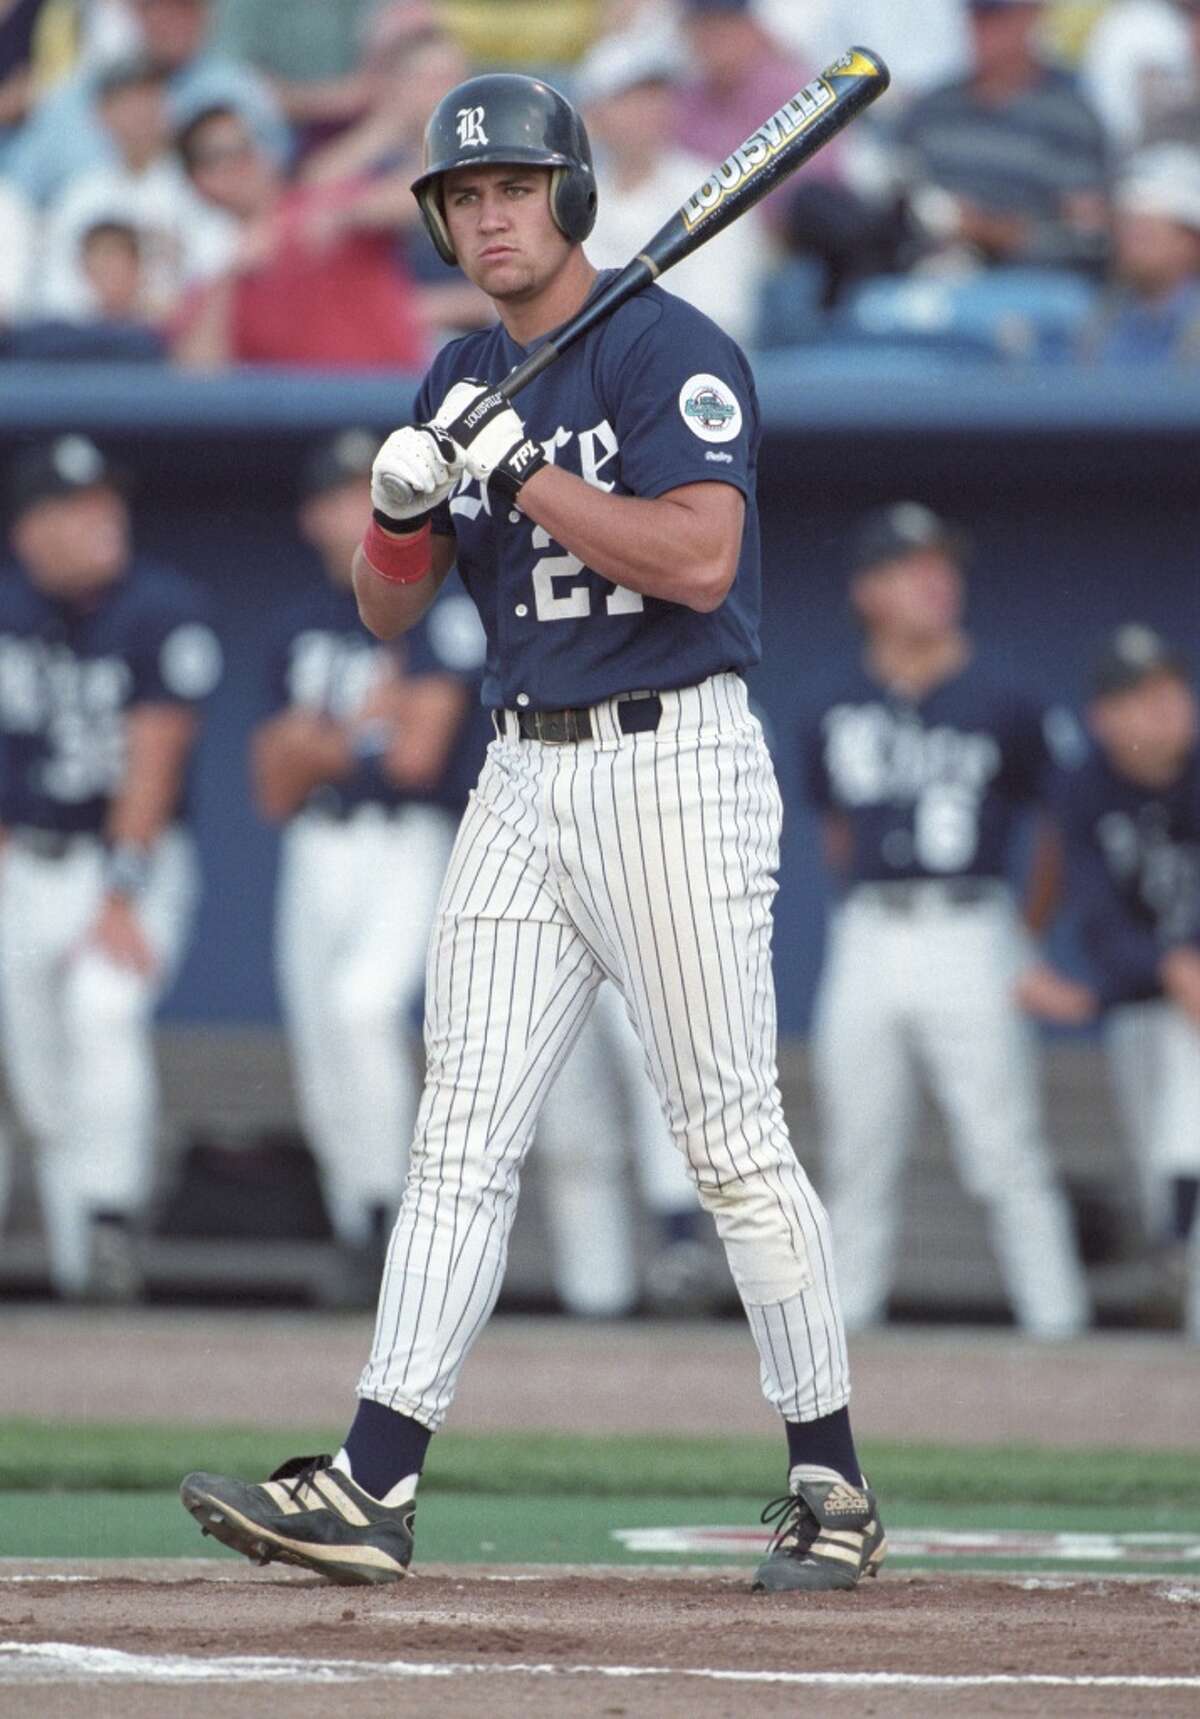 College During his college days at Rice, Berkman was named the 1997 National College Player of the Year and helped lead the Owls to their first College World Series appearance in 1997.